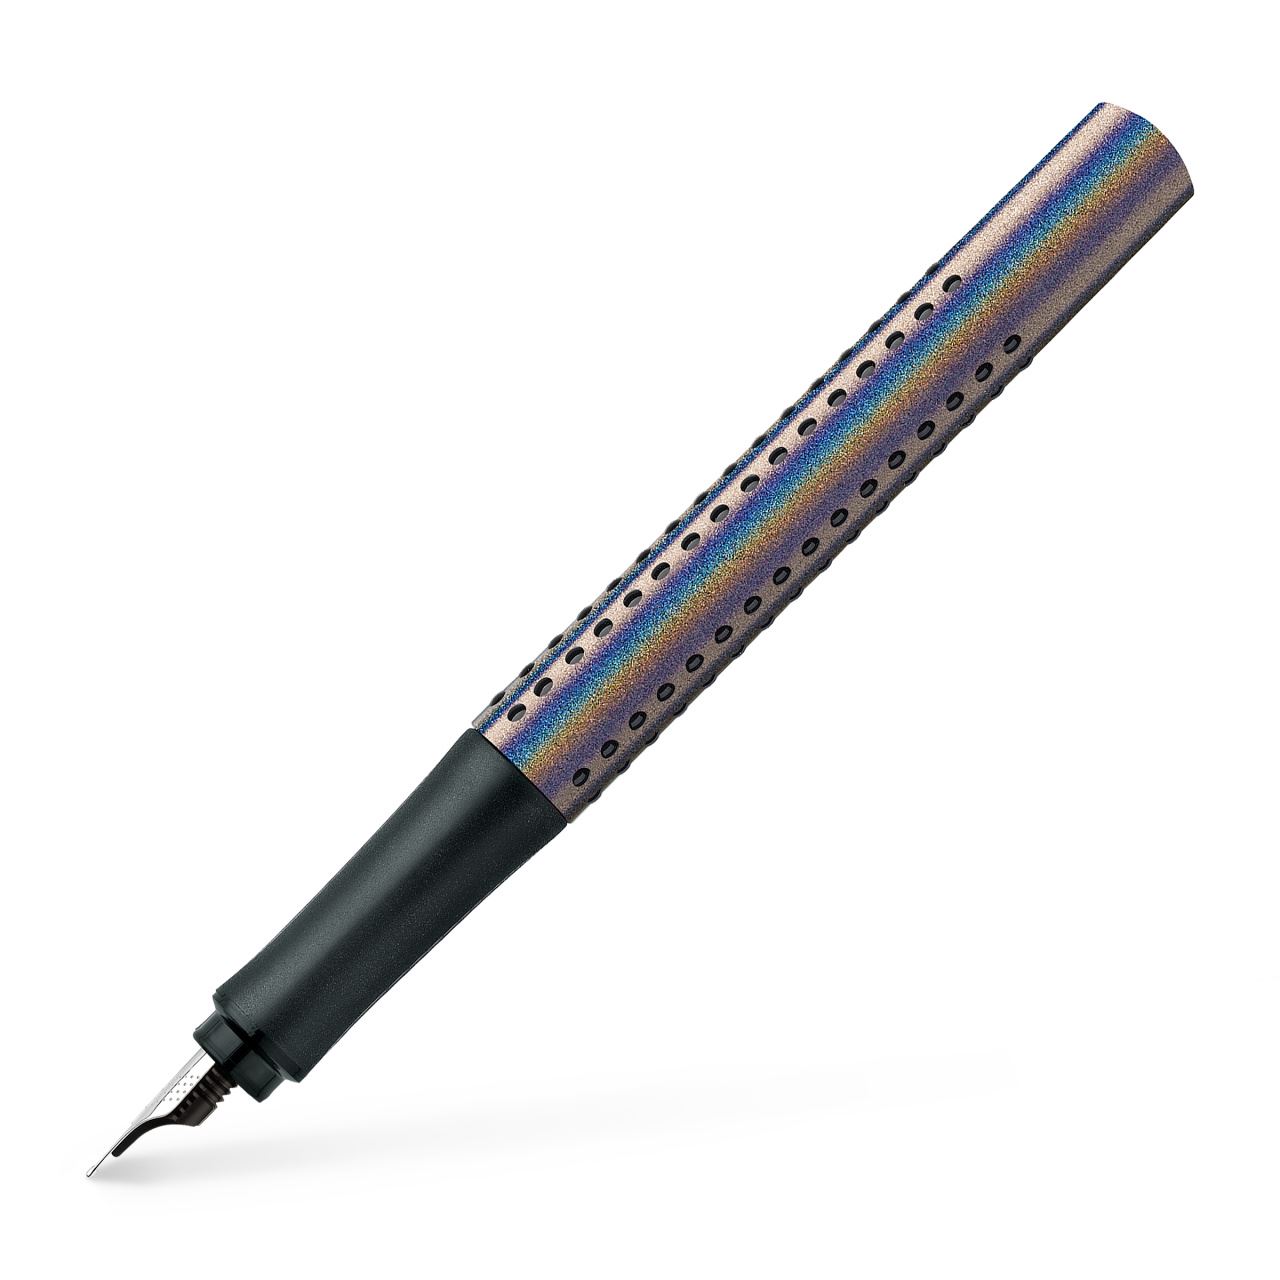 Faber-Castell - Fountain pen Grip Edition Glam M silver